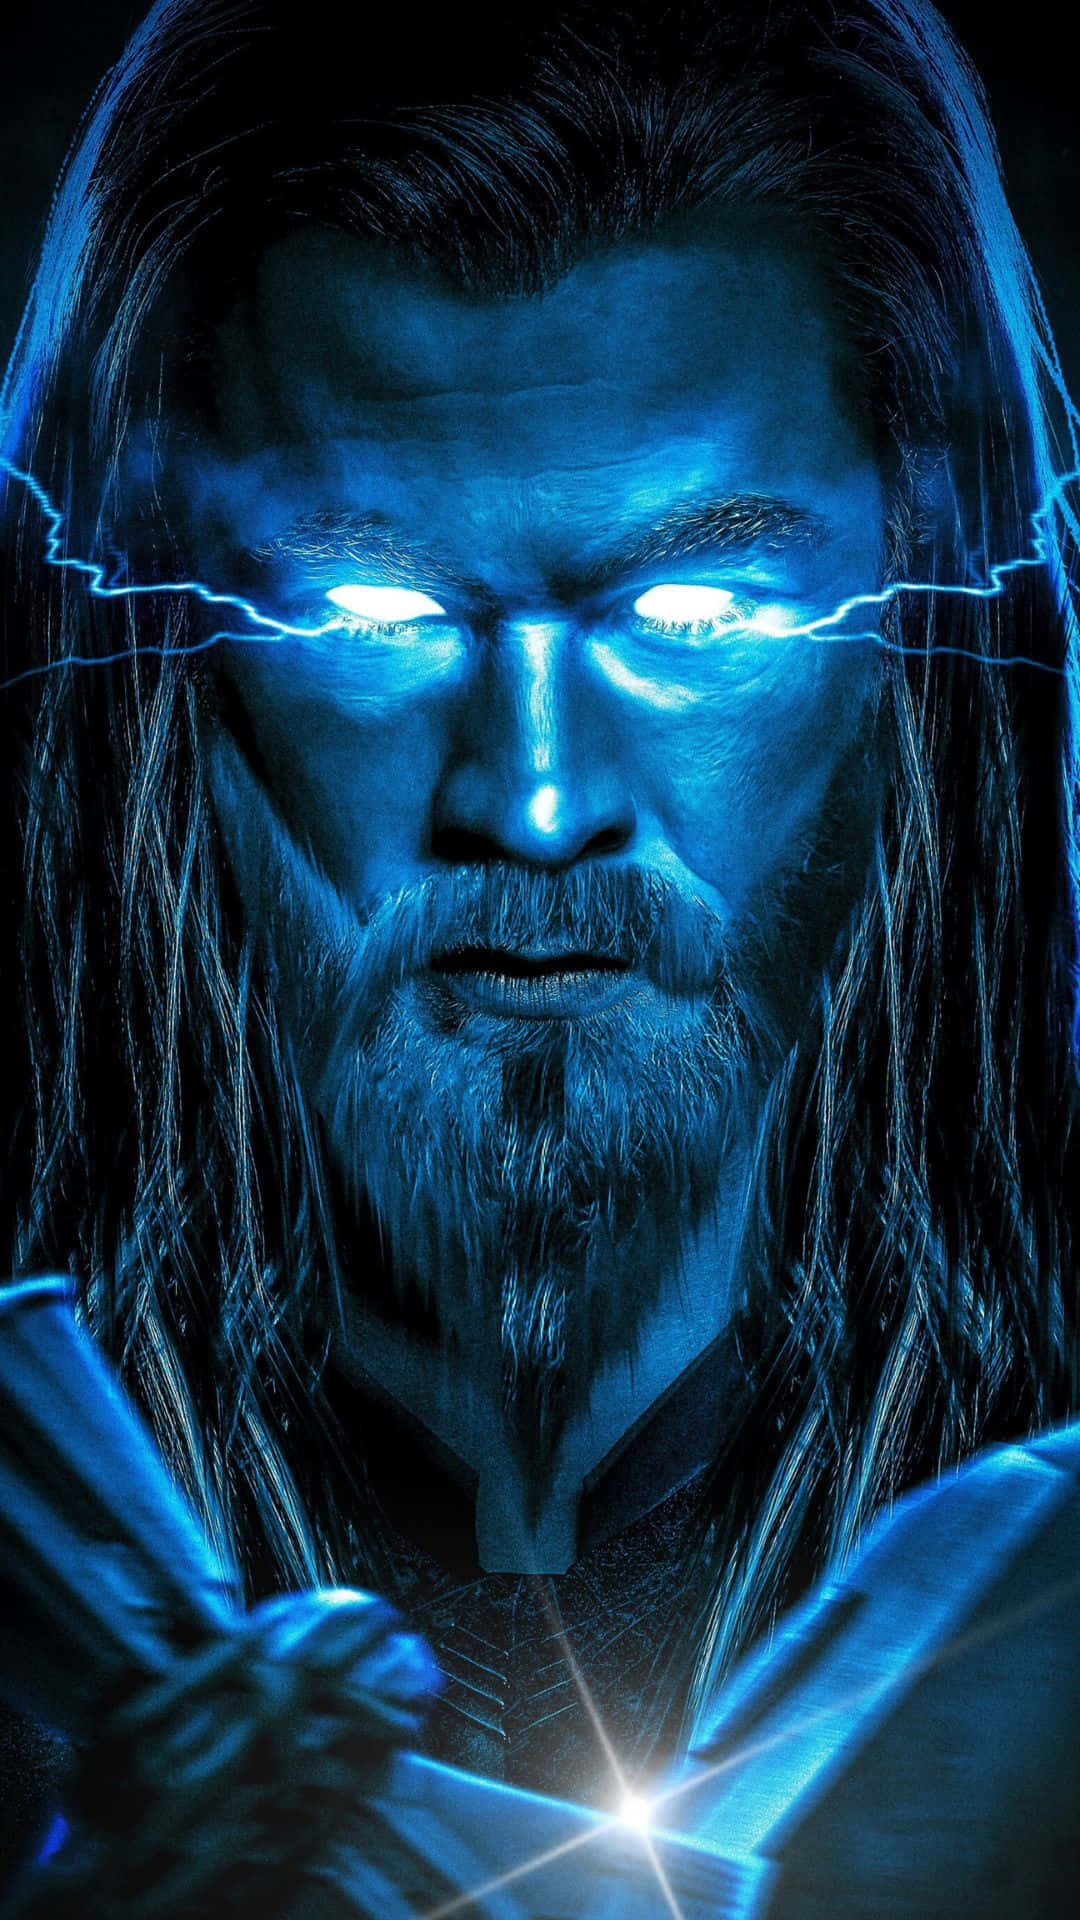 Android Marvel's Avengers Thor Glowing Blue Eyes Background